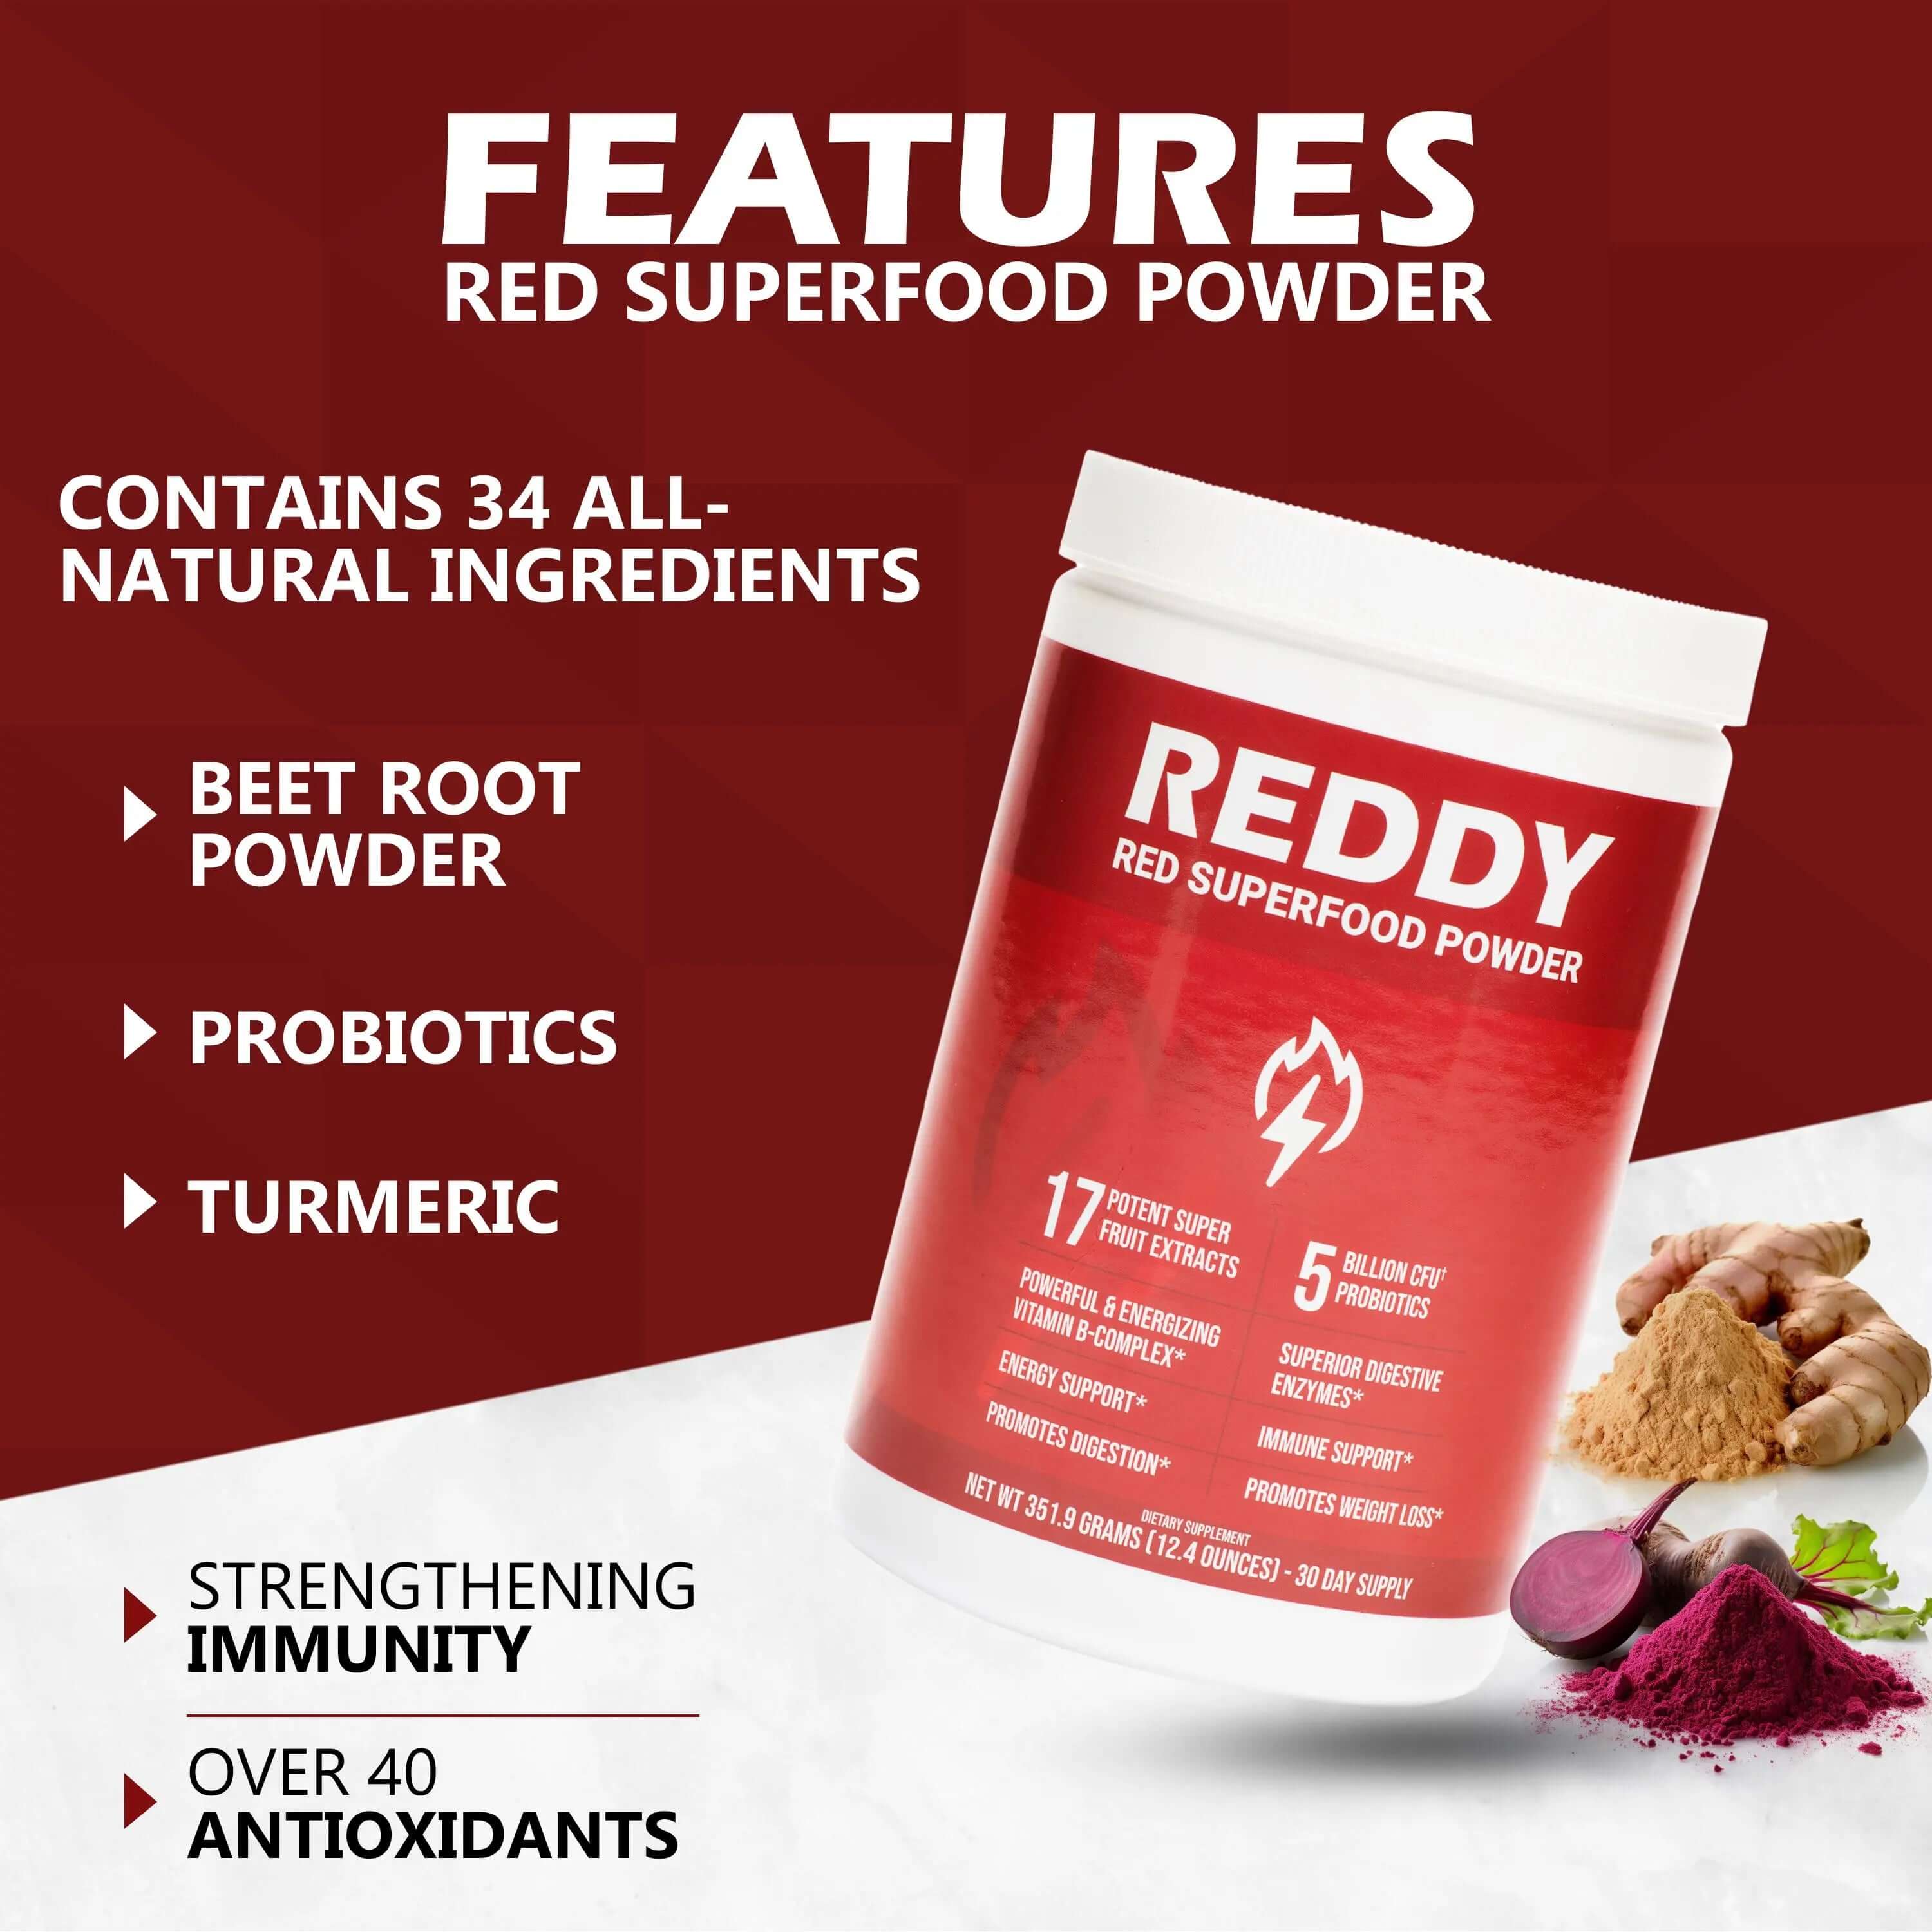 Reddy Red Superfood Powder bottle image at the top of the purchase page, showcasing the all-in-one daily wellness supplement